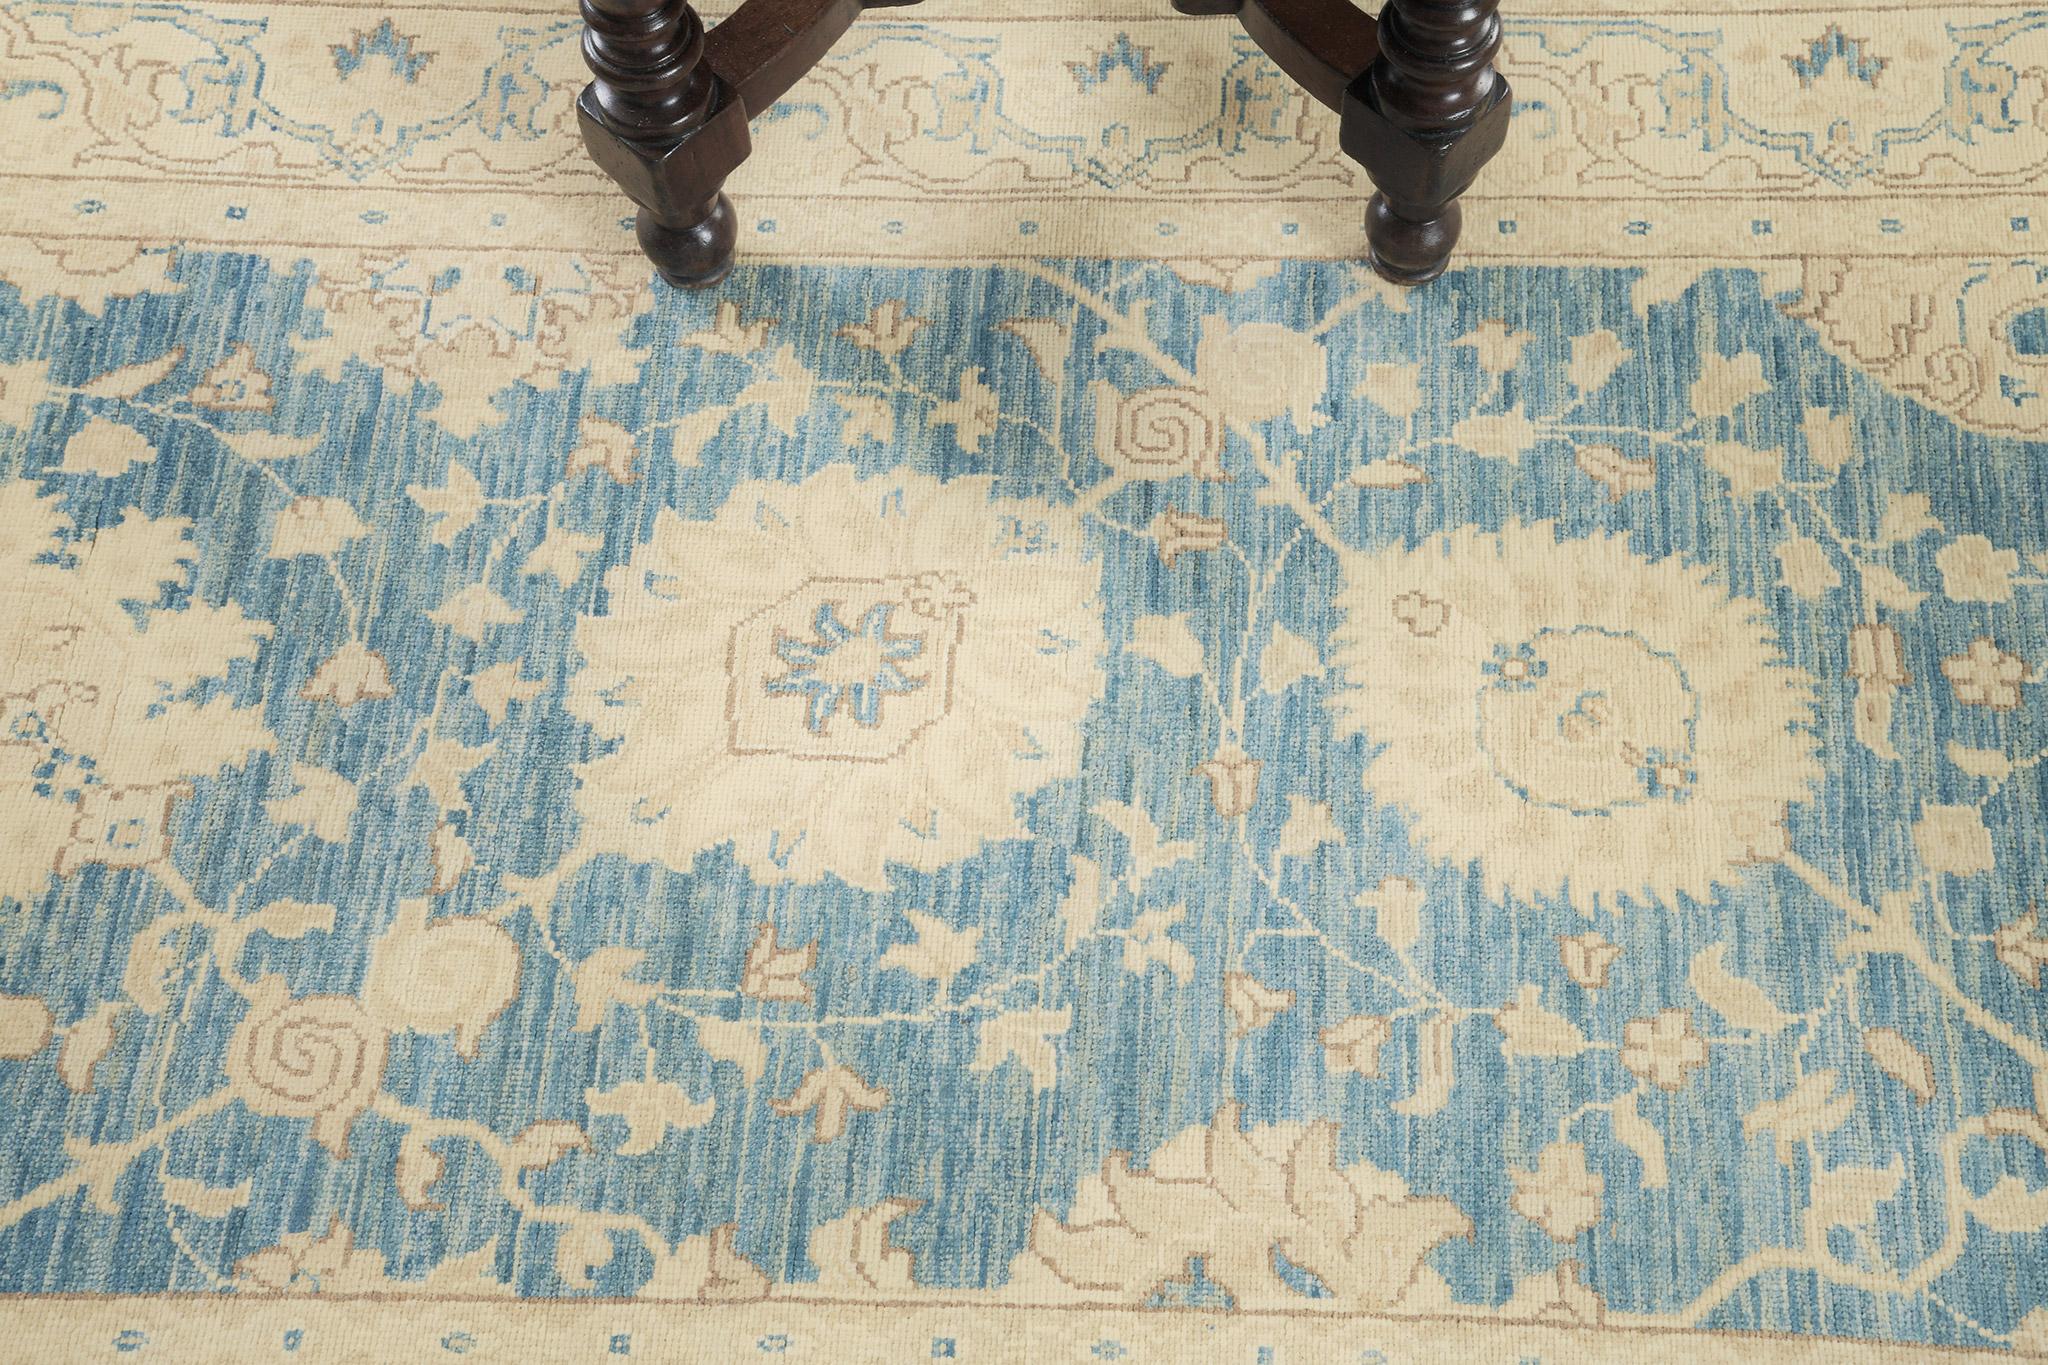 This sophisticated vintage-styled Tabriz rug from our Rapture Collection has its essence to transform your room full of comfortability and ambiance. Its scrolling vinery symmetry reflects intricacy and elegance in the cool-toned scheme. A must-have